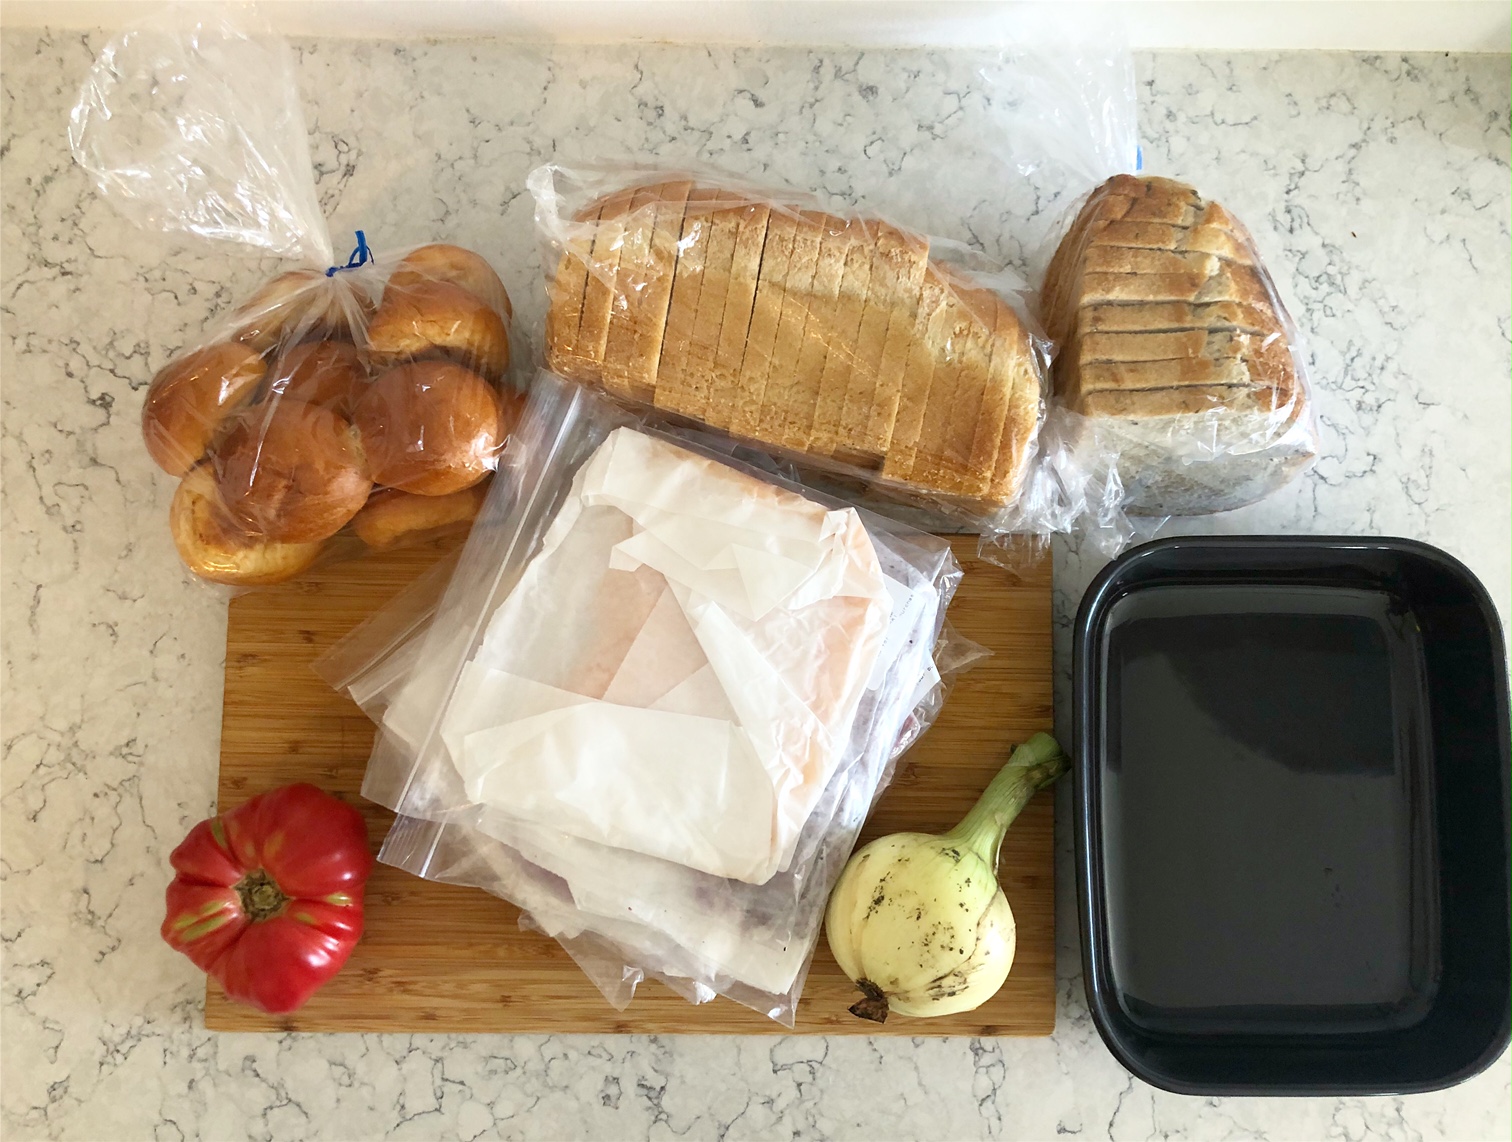 On a white veined counter, there is a wooden cutting board with plastic bags of bread, bags of sliced deli meat, a tomato, a dirty onion, and a black square ceramic container. Photo by Alyssa Buckley.